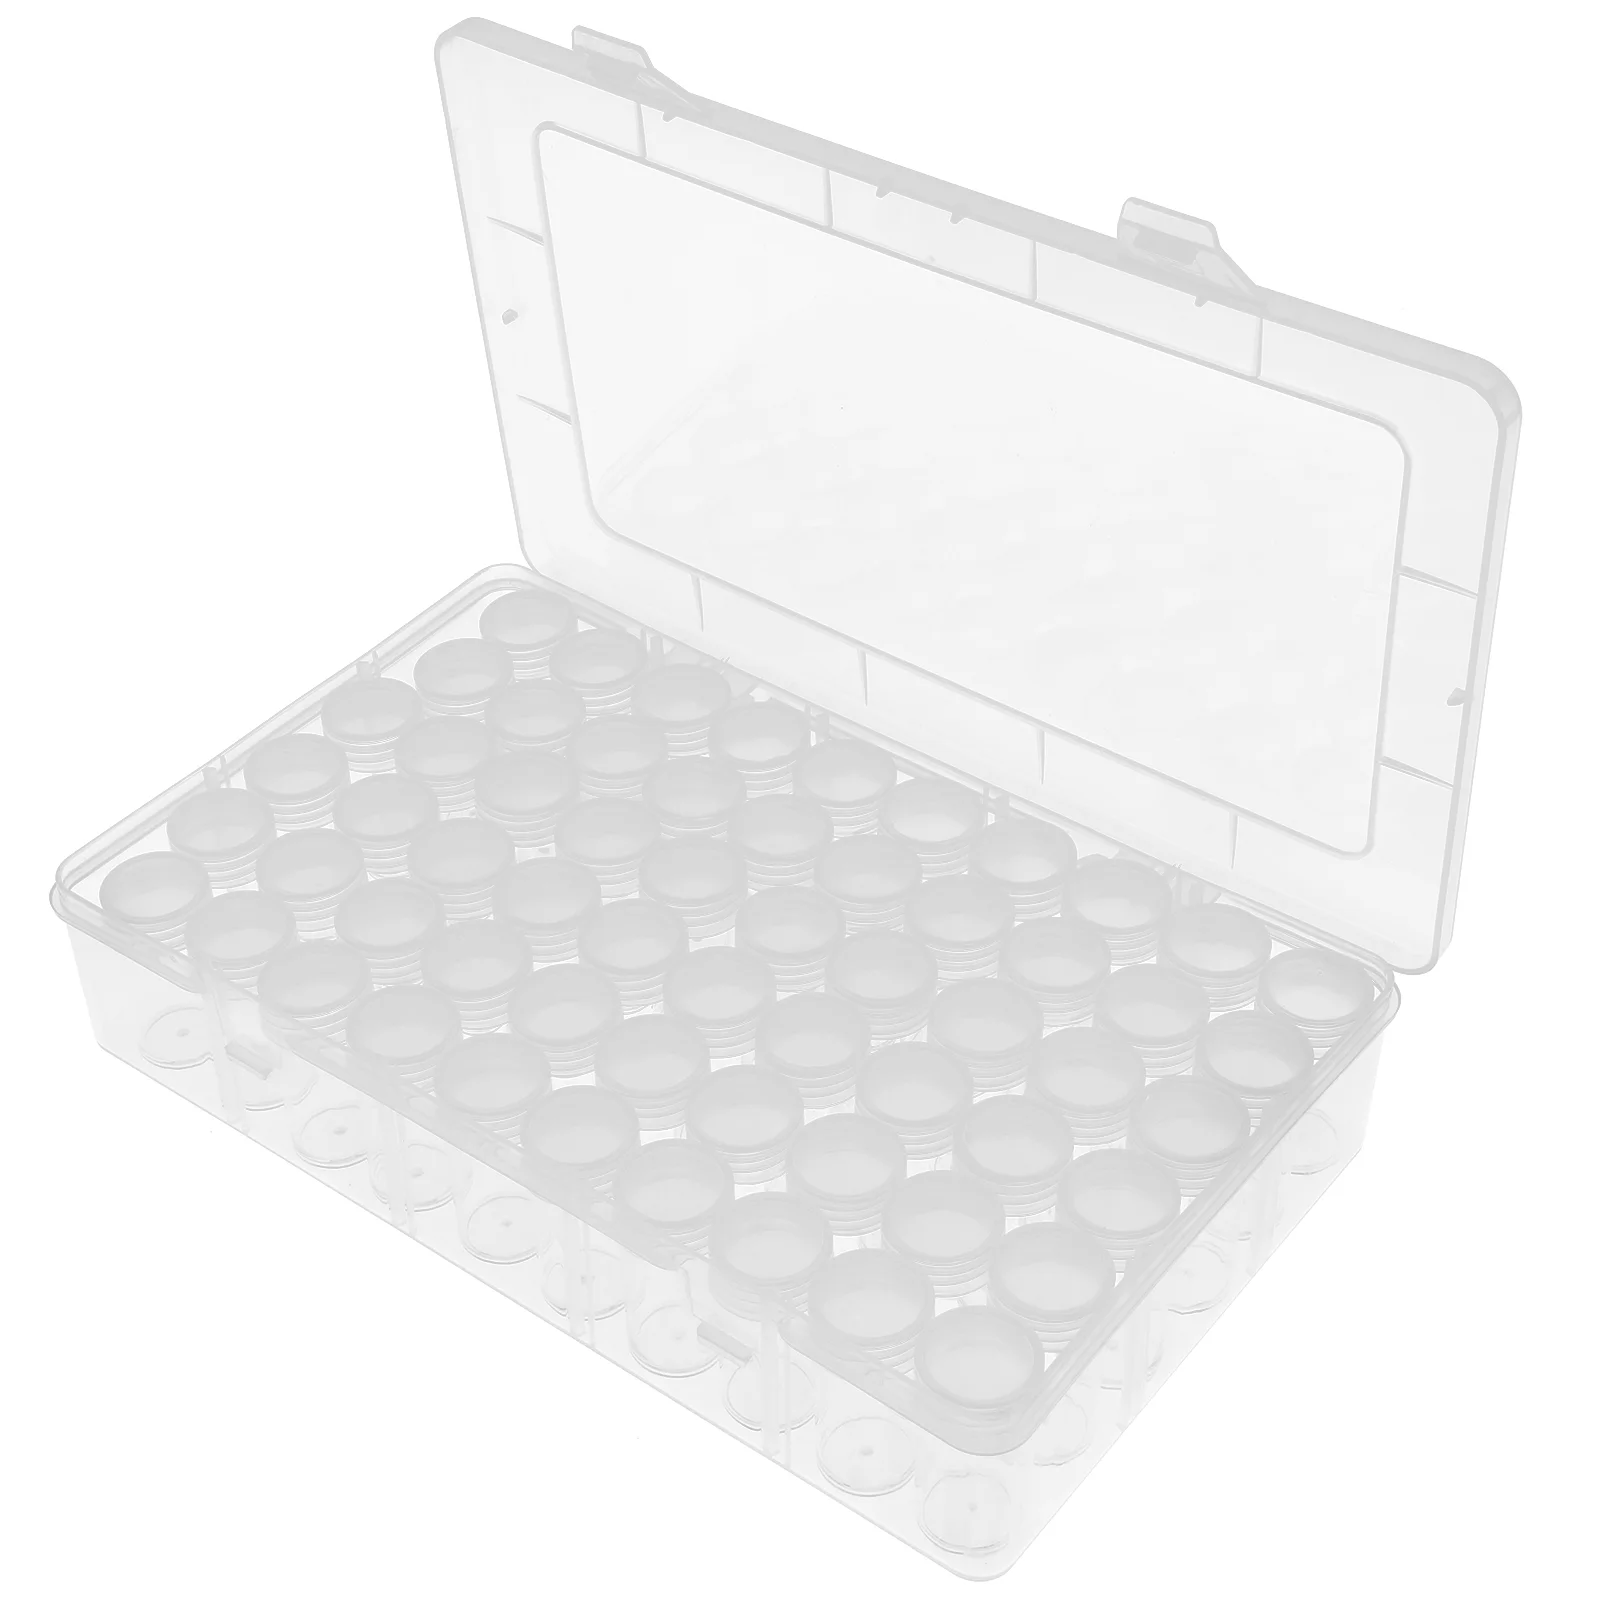 

Transparent Storage Box Organizer Seed Containers Clay Snack Travel Plastic Craft Bottled Organizers